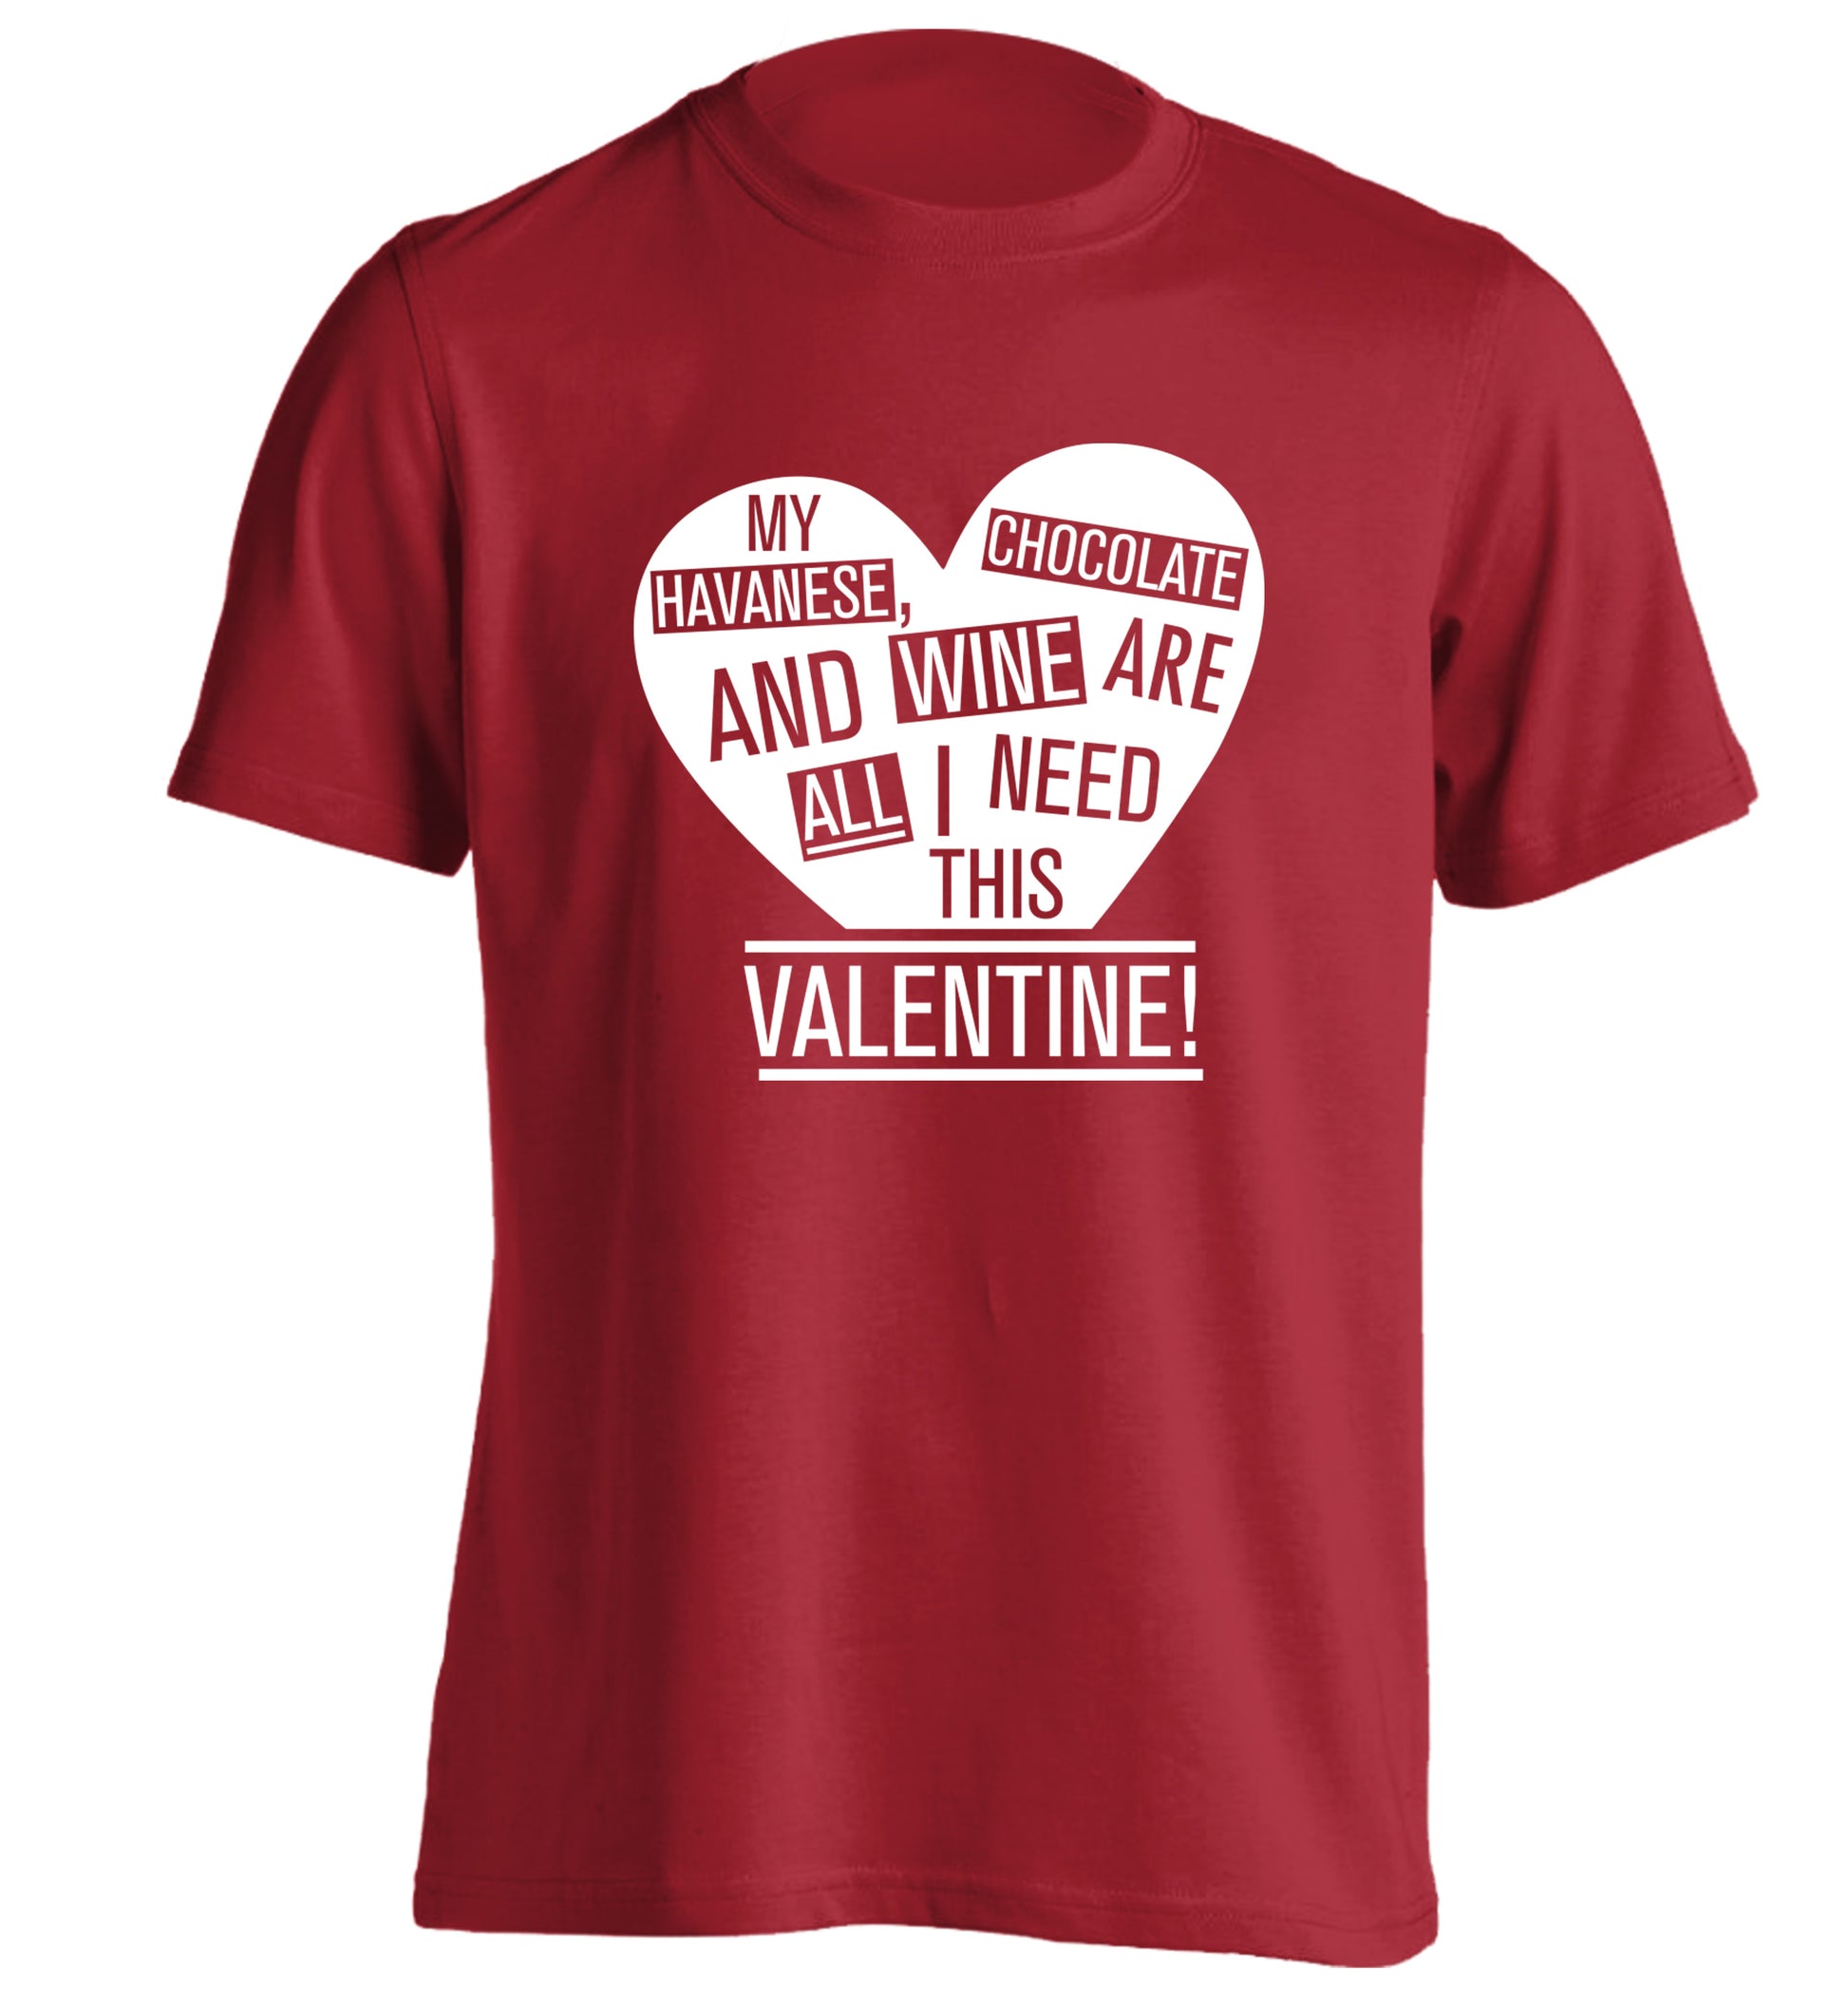 My havanese, chocolate and wine are all I need this valentine! adults unisex red Tshirt 2XL